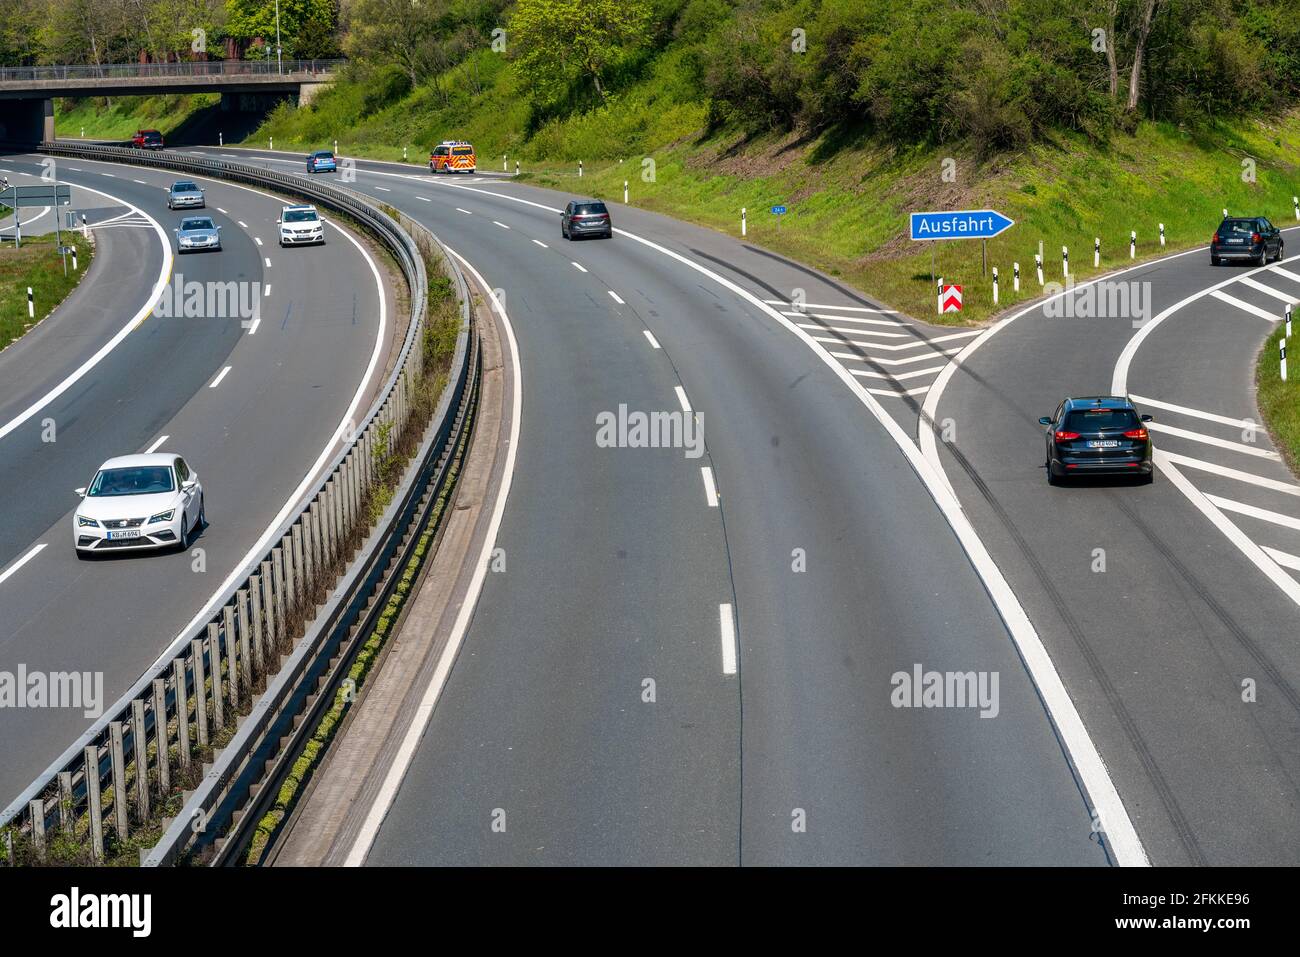 Viersen, Germany 25 April 2021: Car traffic on the Autobahn in Germany Stock Photo